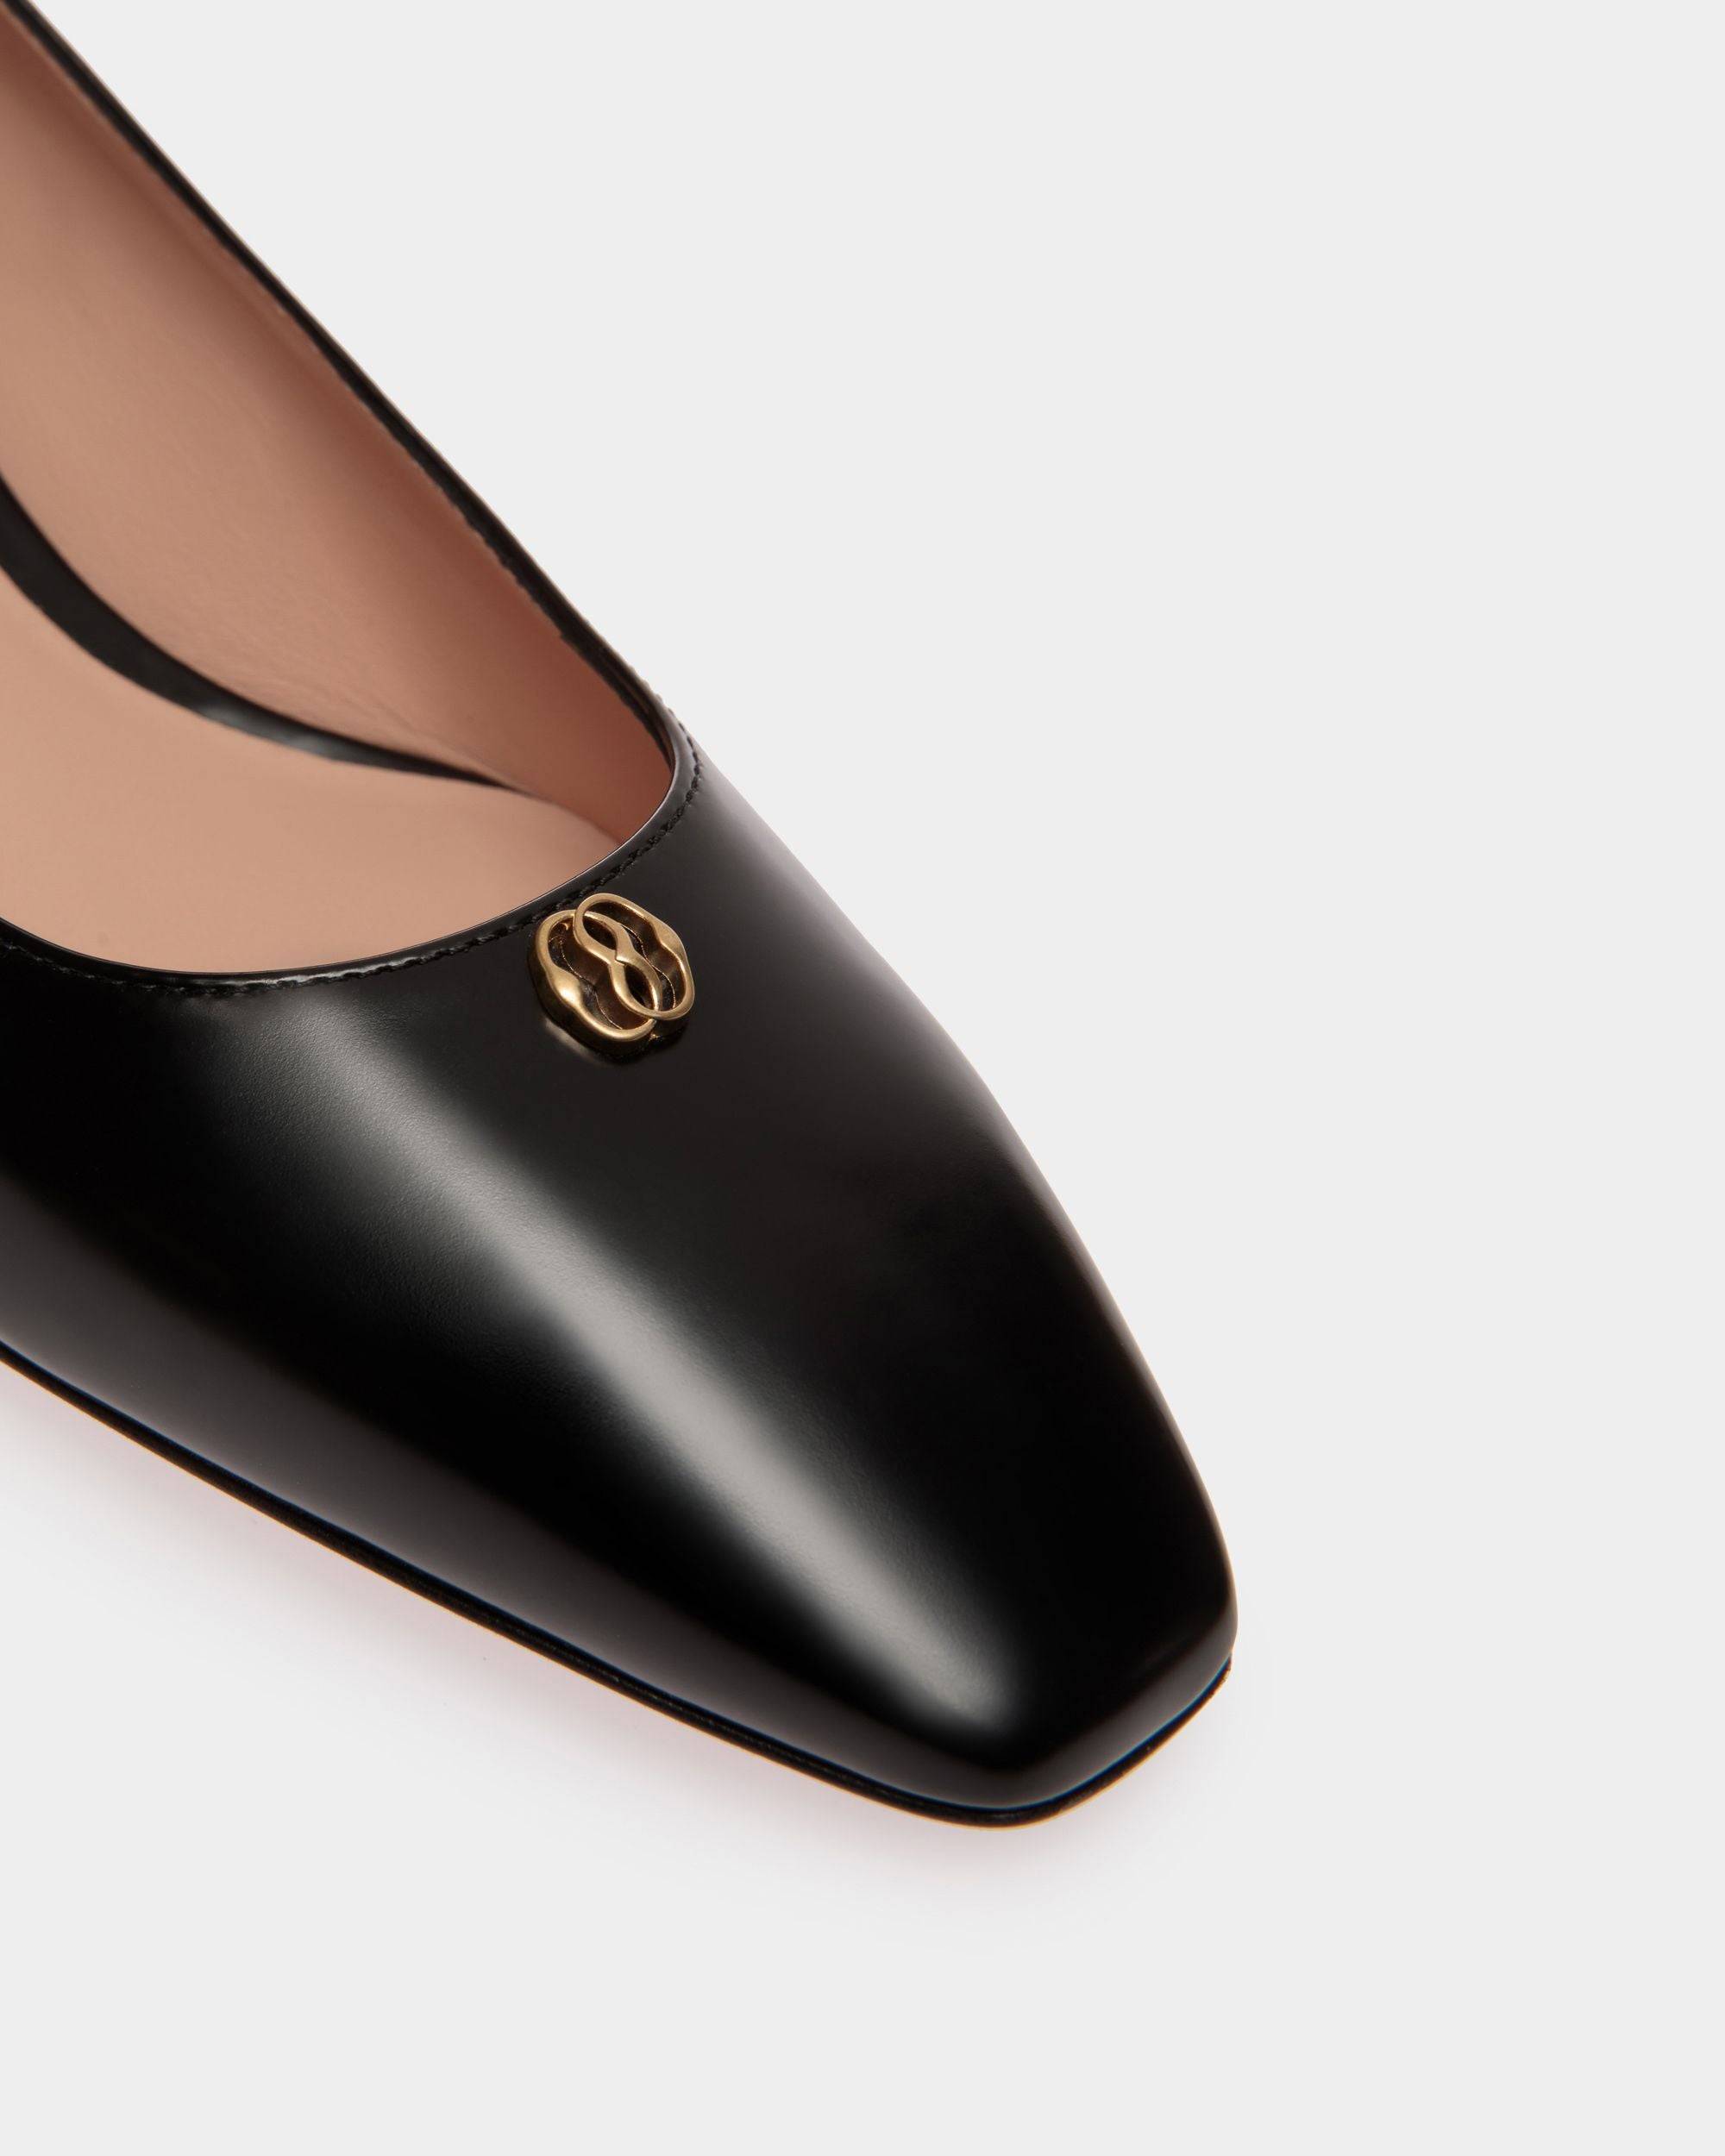 Sylt | Women's Pump in Black Leather | Bally | Still Life Detail